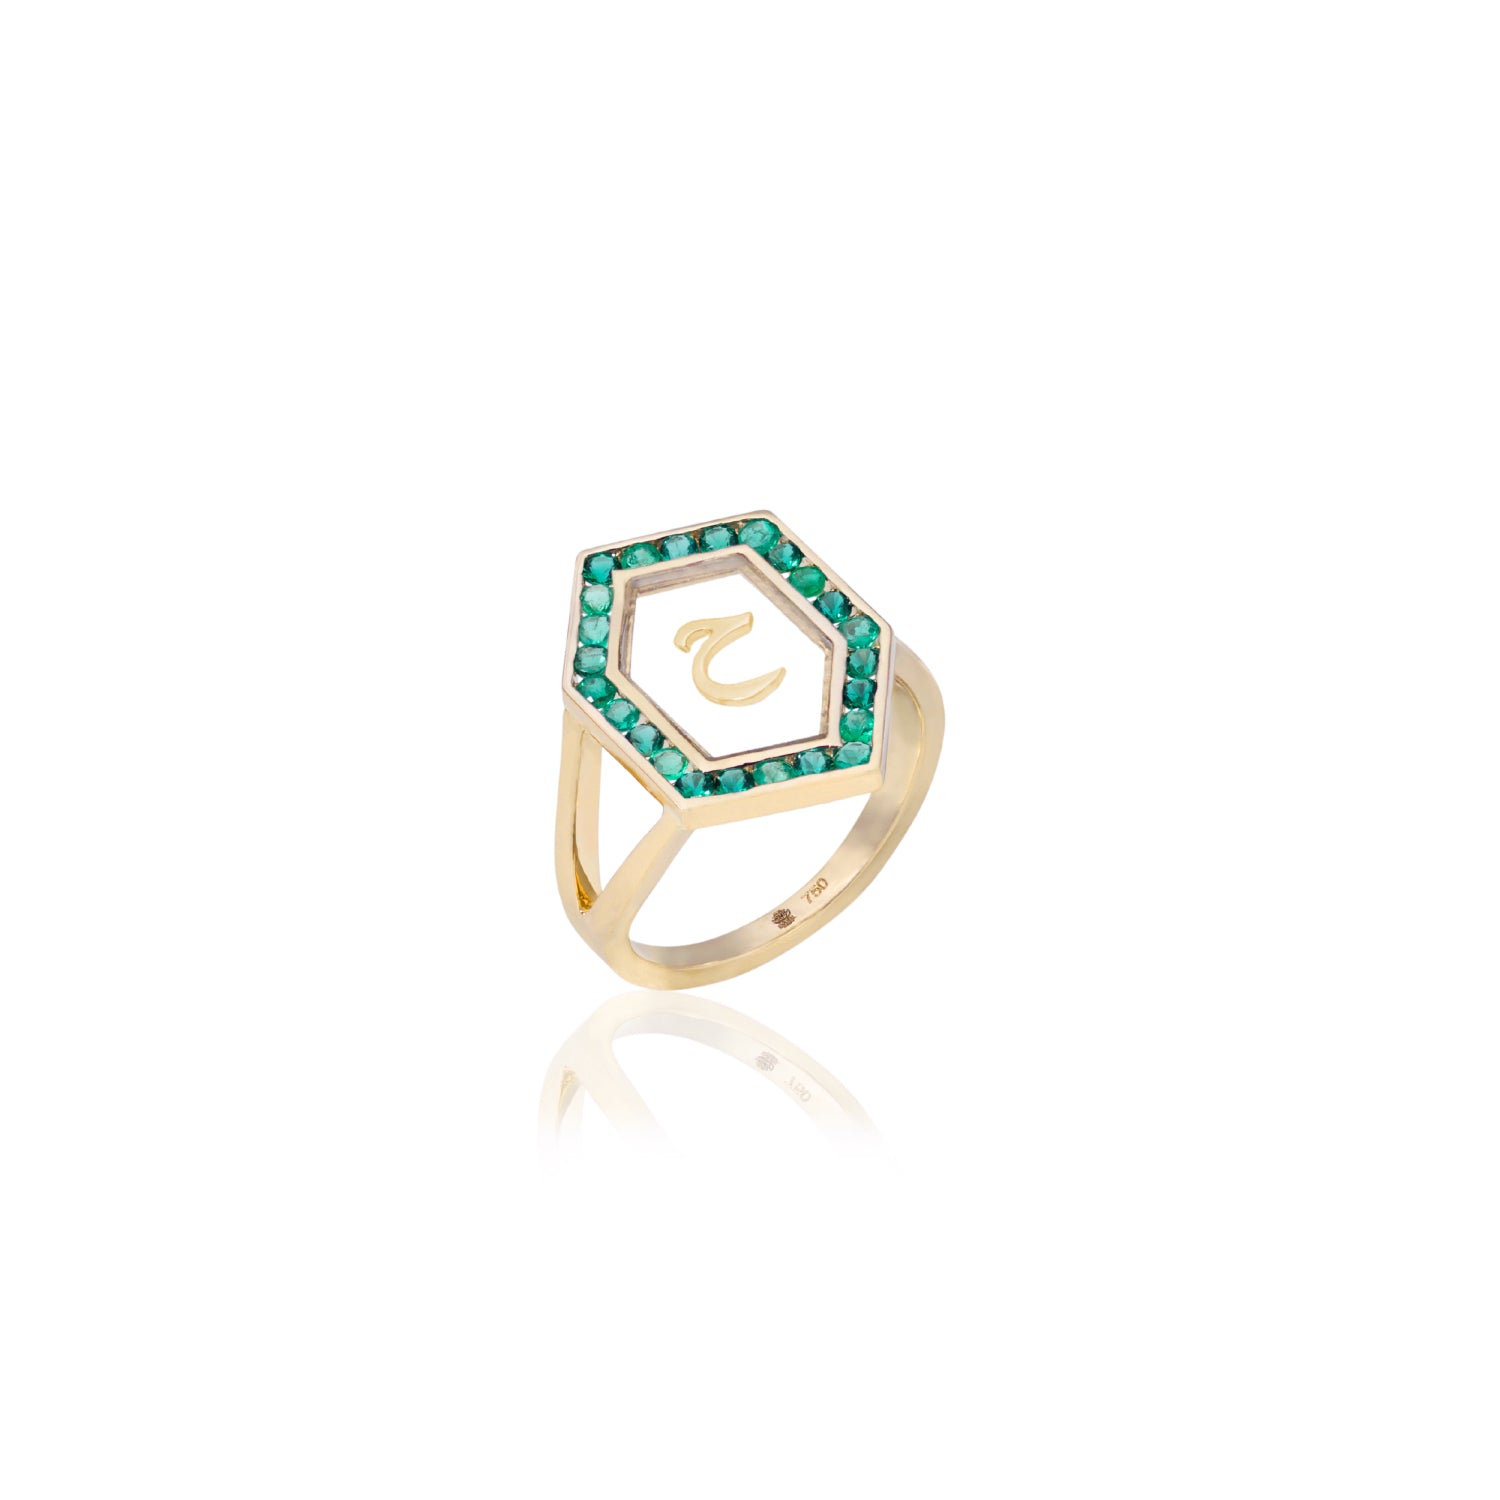 Qamoos 1.0 Letter ح Emerald Ring in Yellow Gold